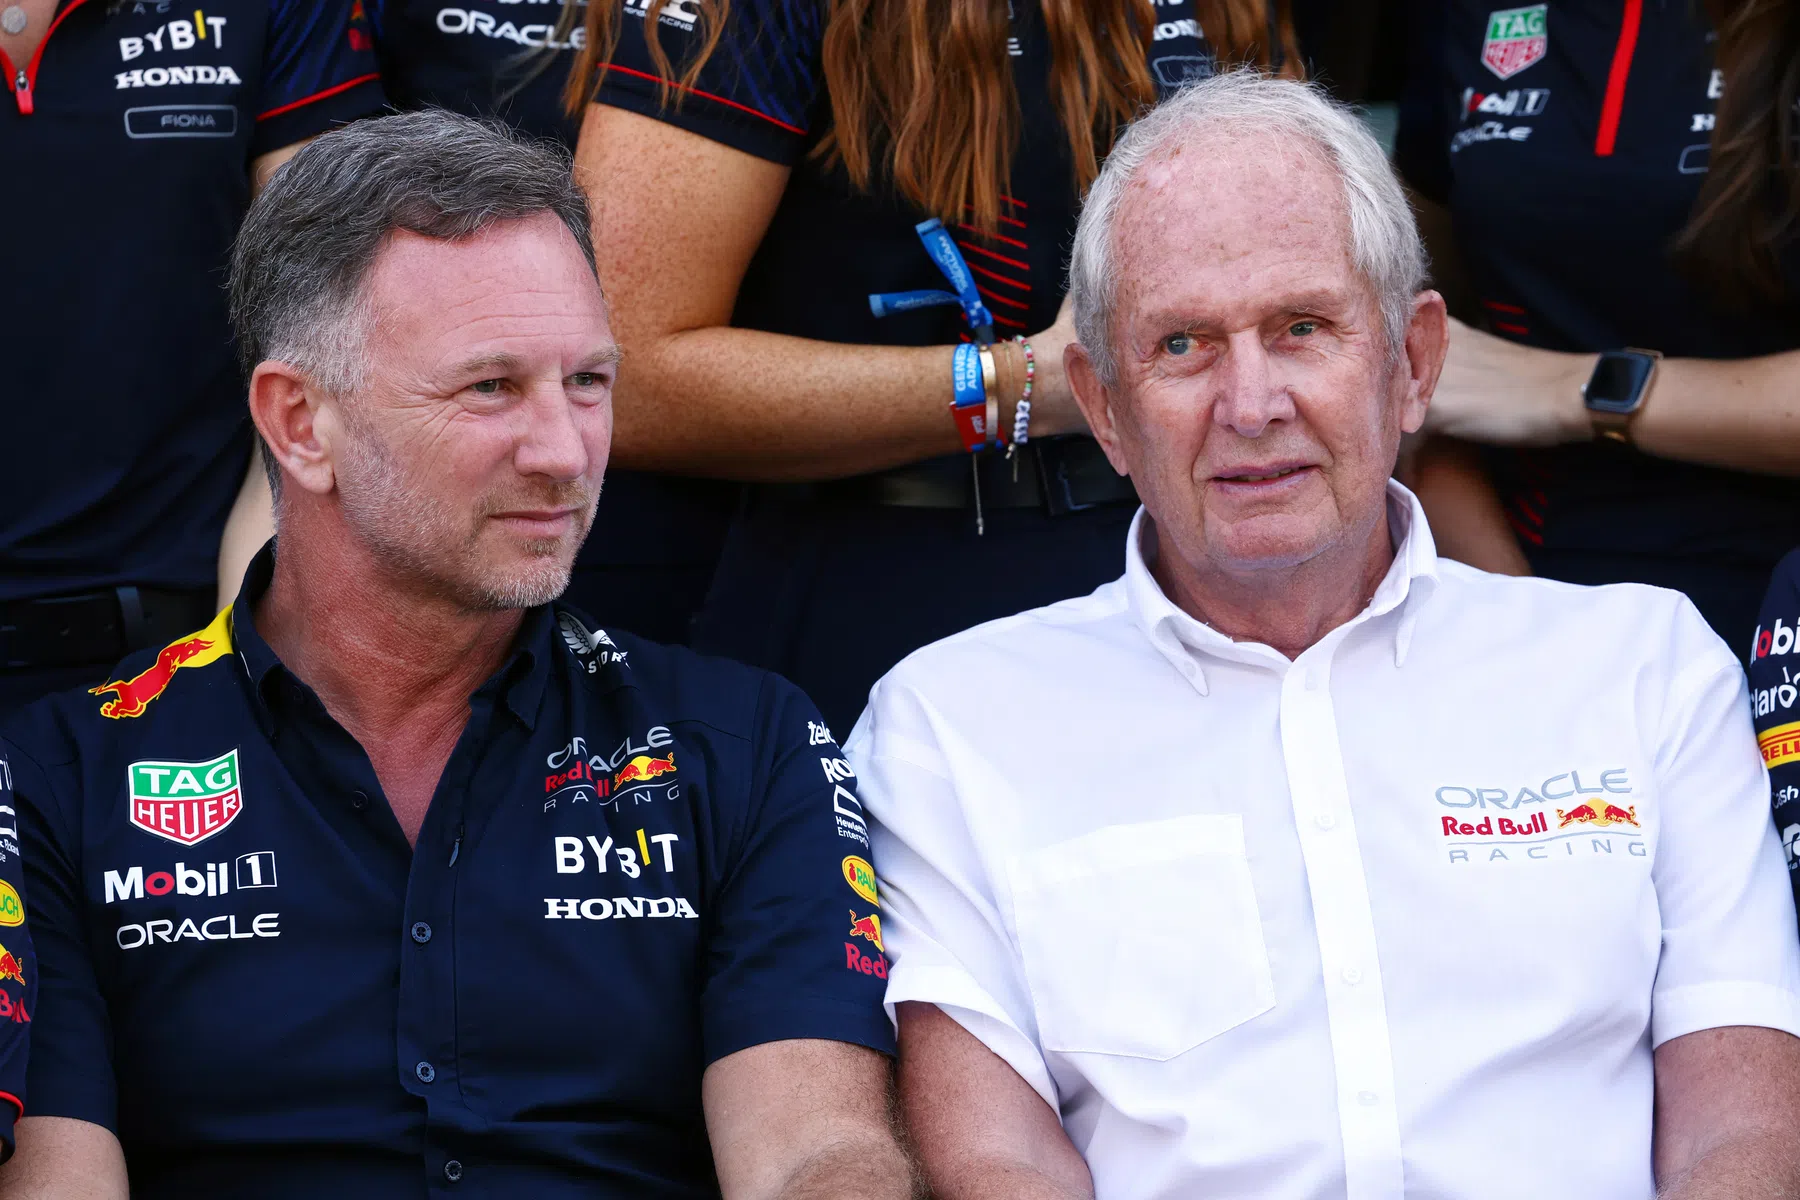 helmut marko future red bull racing with max verstappen